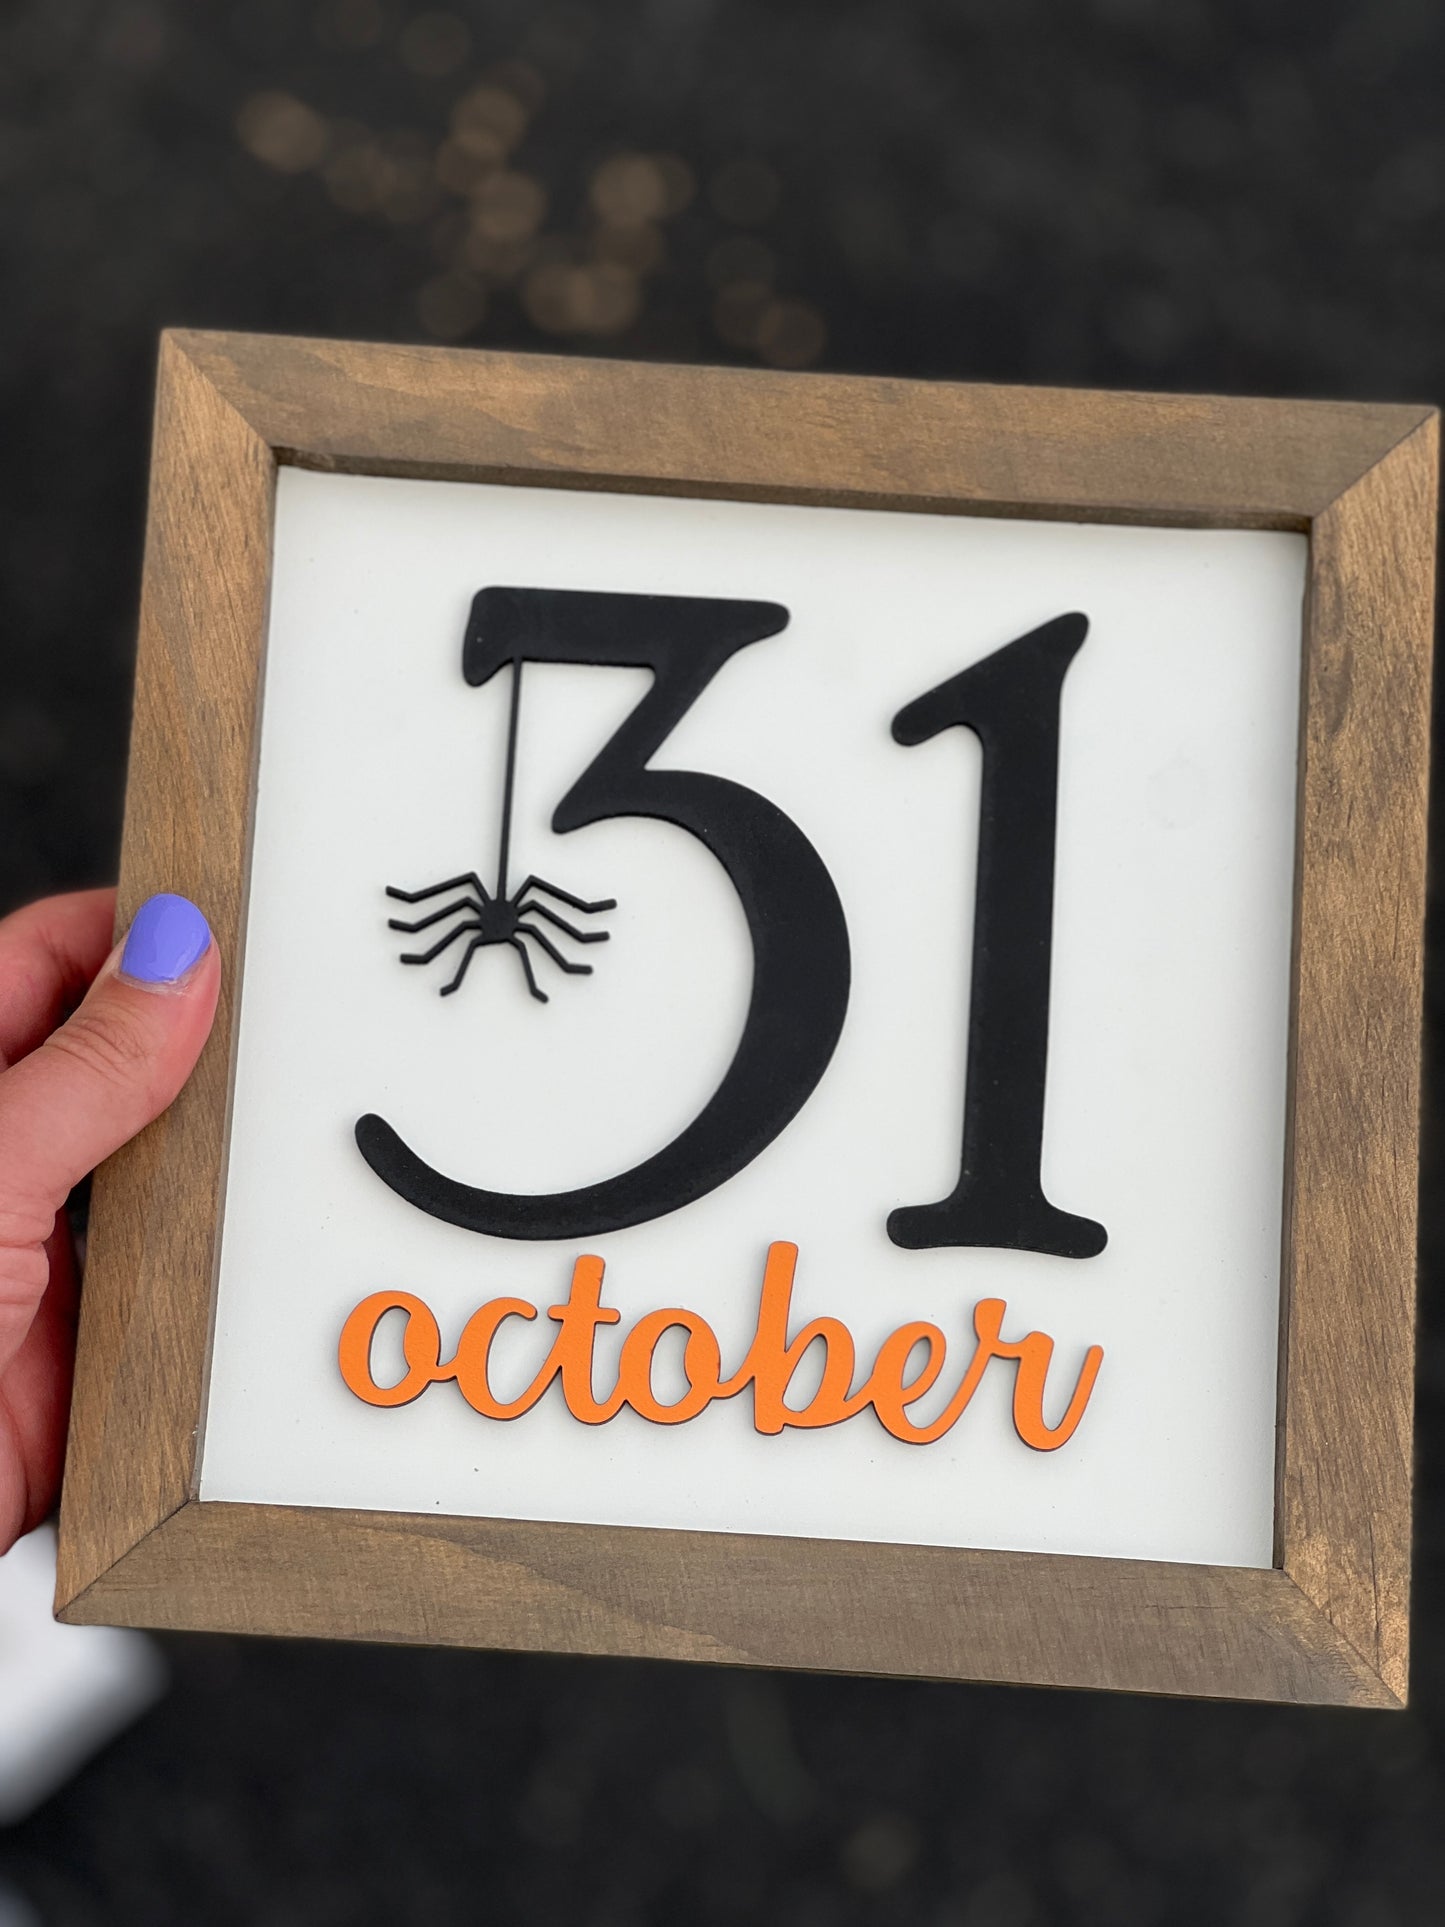 October 31 | Halloween Sign | 8x8 inch Wood Sign